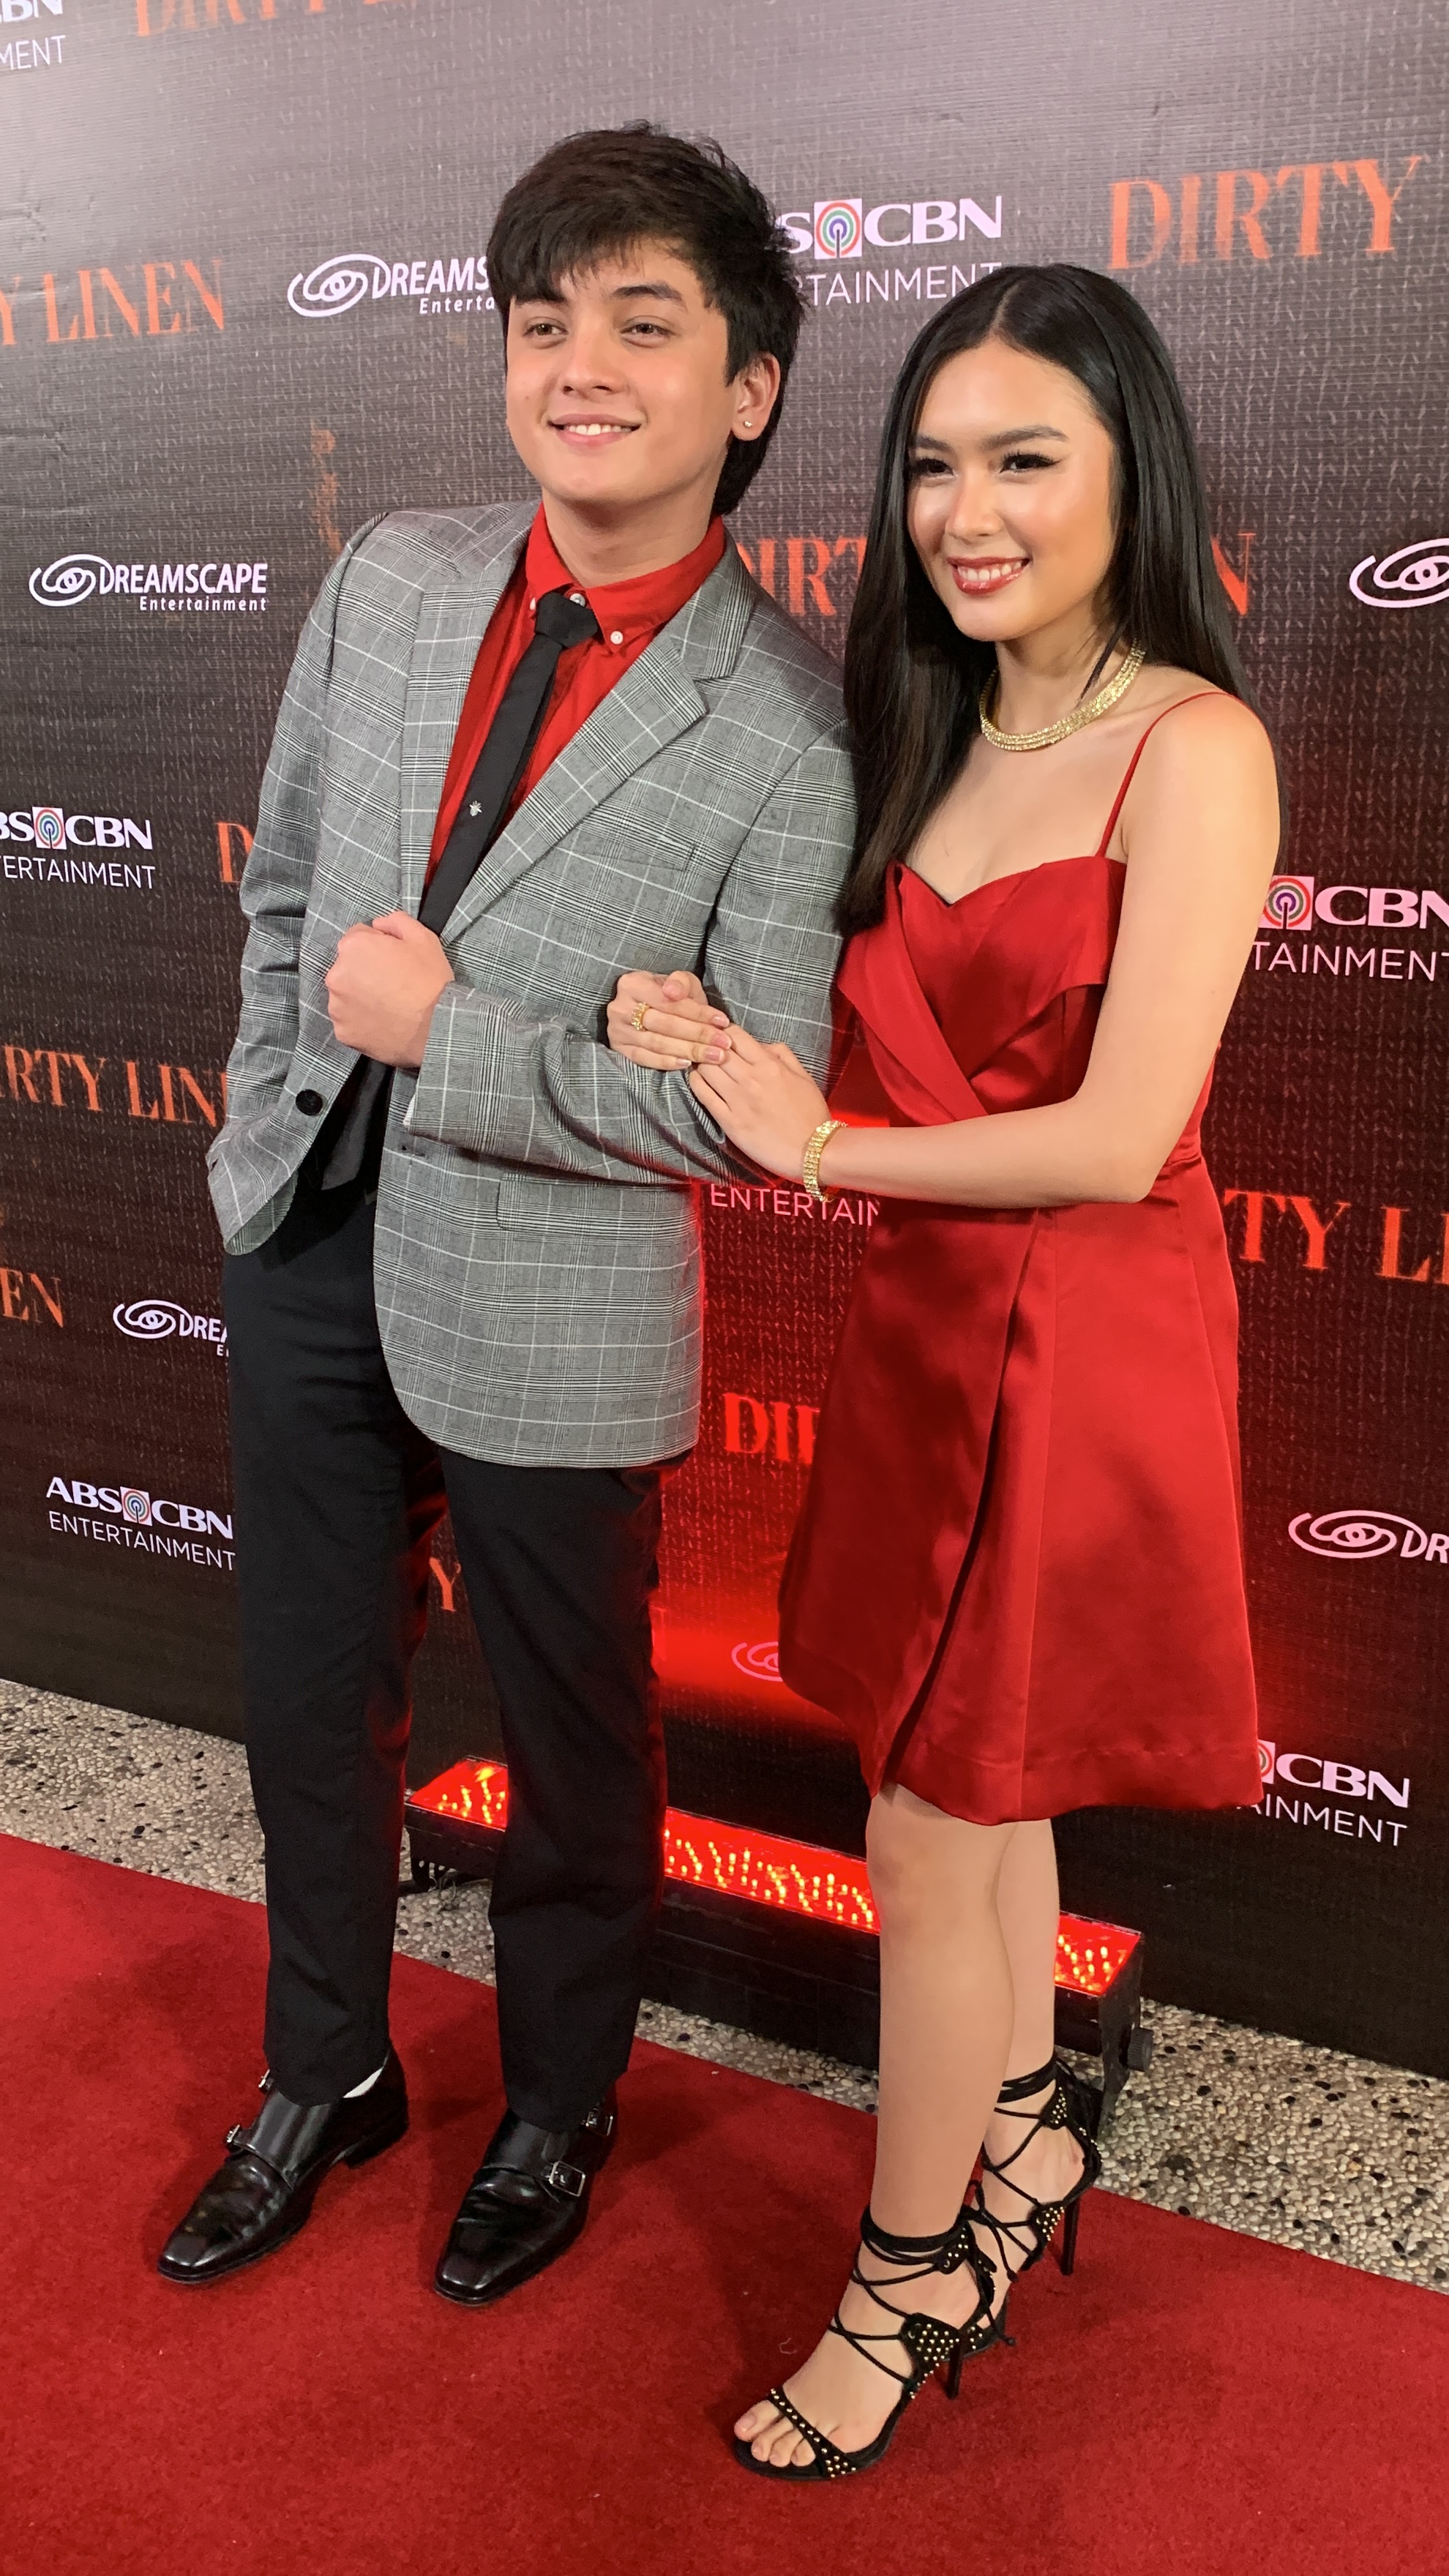 Seth Fedelin and Francine Diaz at the Dirty Linen grand mediacon